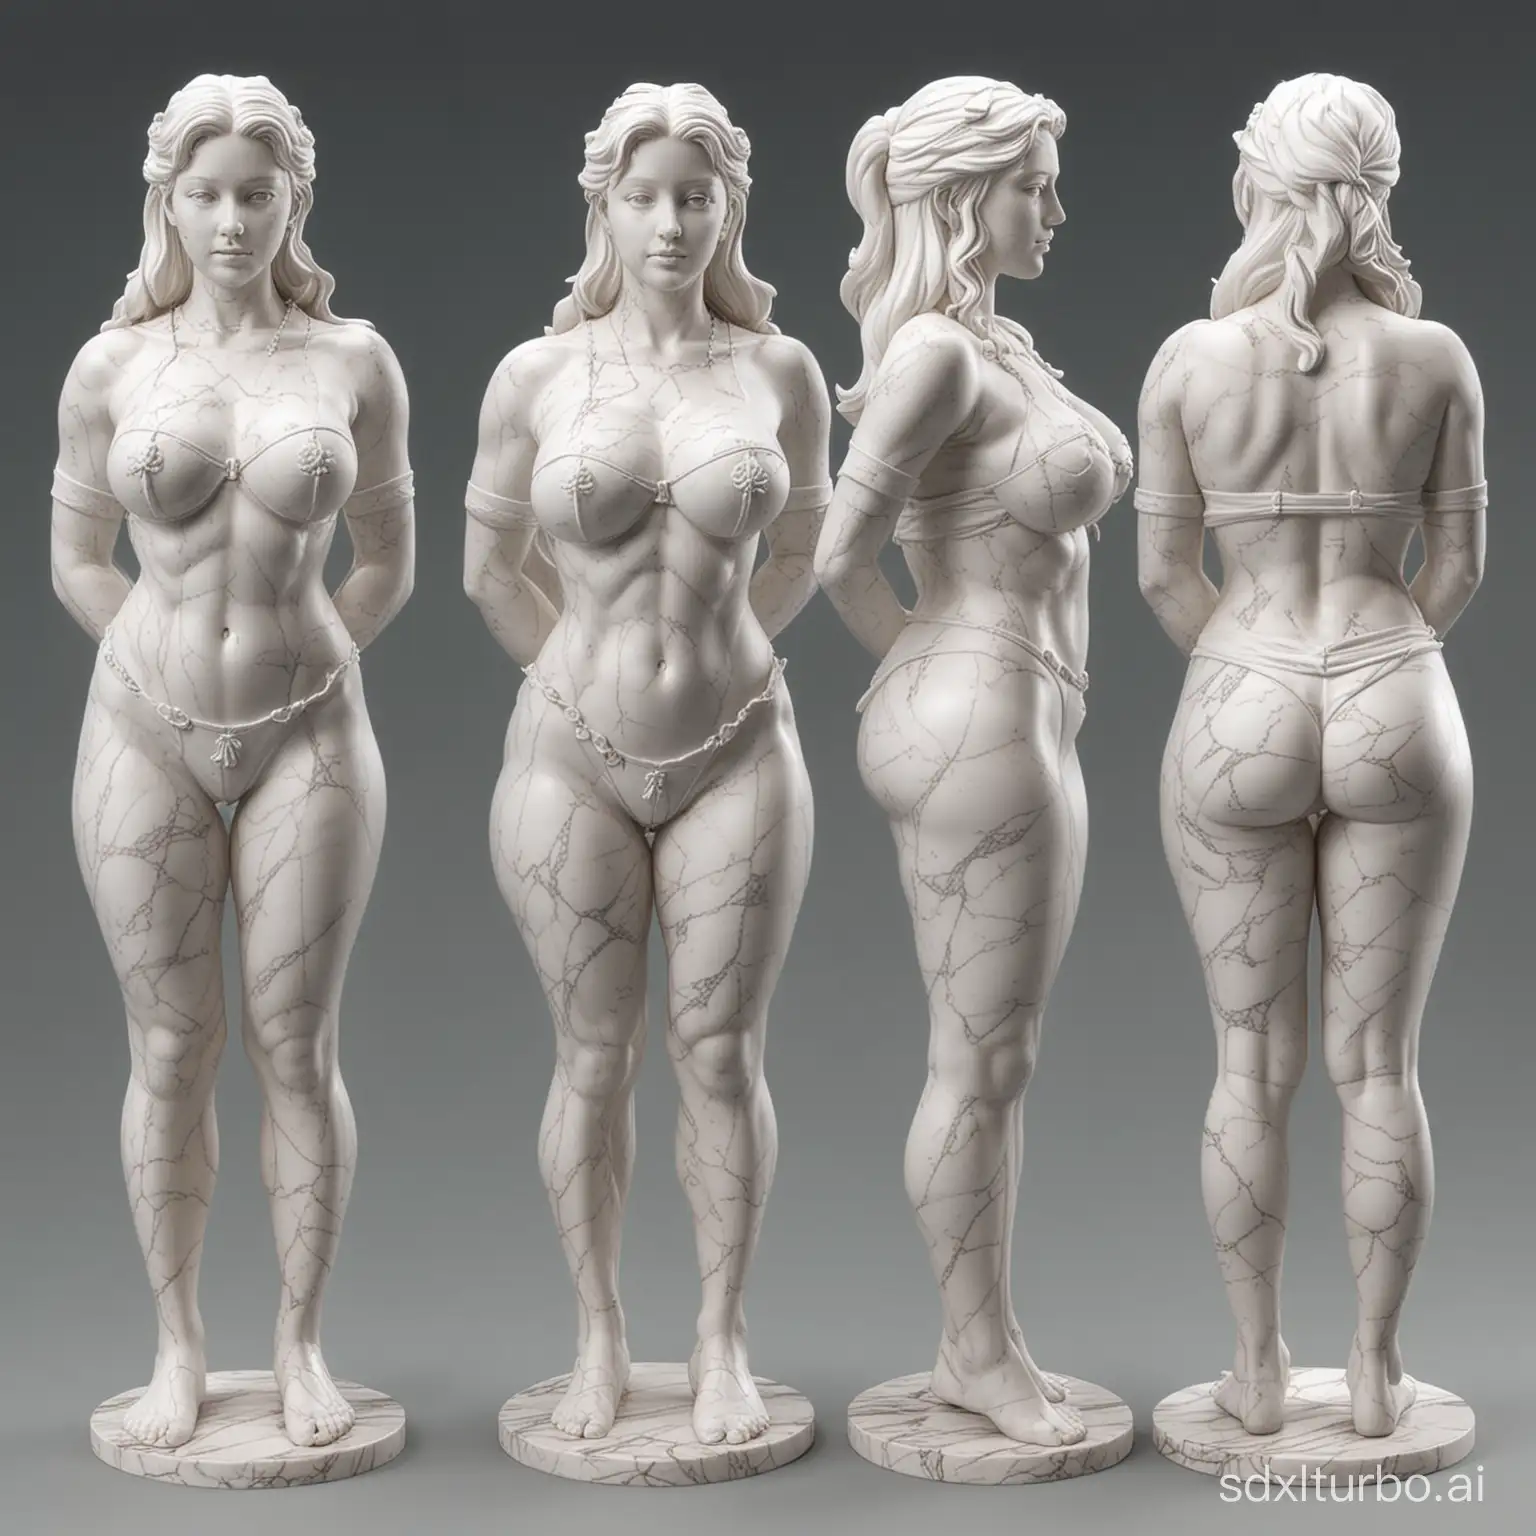 Generate three views, one is the front view, two is the left view, and three is the rear view. The 3D white marble model sculpture depicts a huge breast girl, Sailor suit